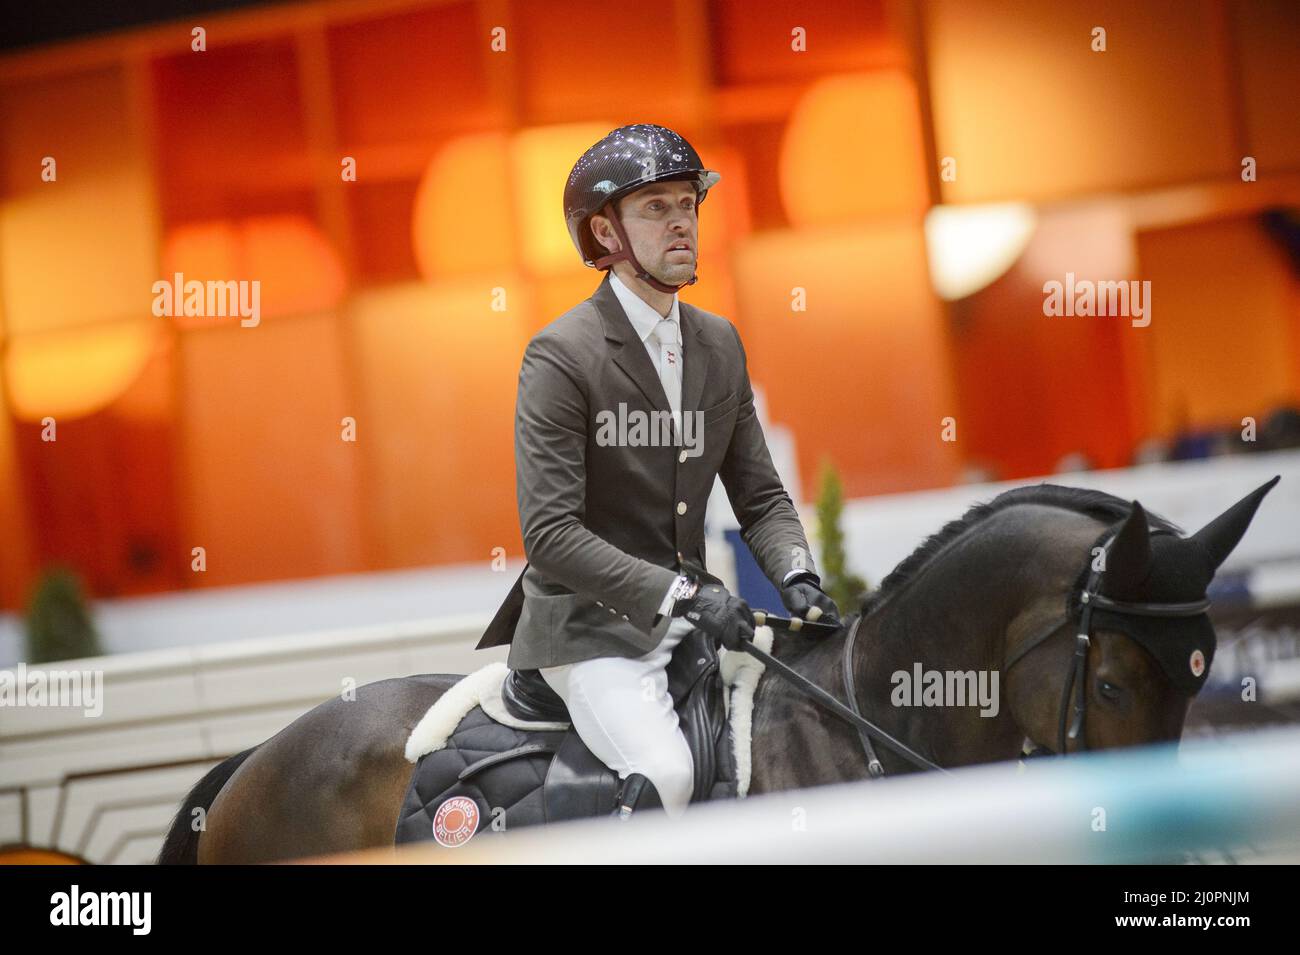 Simon DELESTRE (FRA) riding CAYMAN JOLLY JUMPER during the Saut Hermes prize at the Saut-Hermes 2022, equestrian FEI event on March 19, 2022 at the ephemeral Grand-palais in Paris, France - Photo: Christophe Bricot/DPPI/LiveMedia Stock Photo